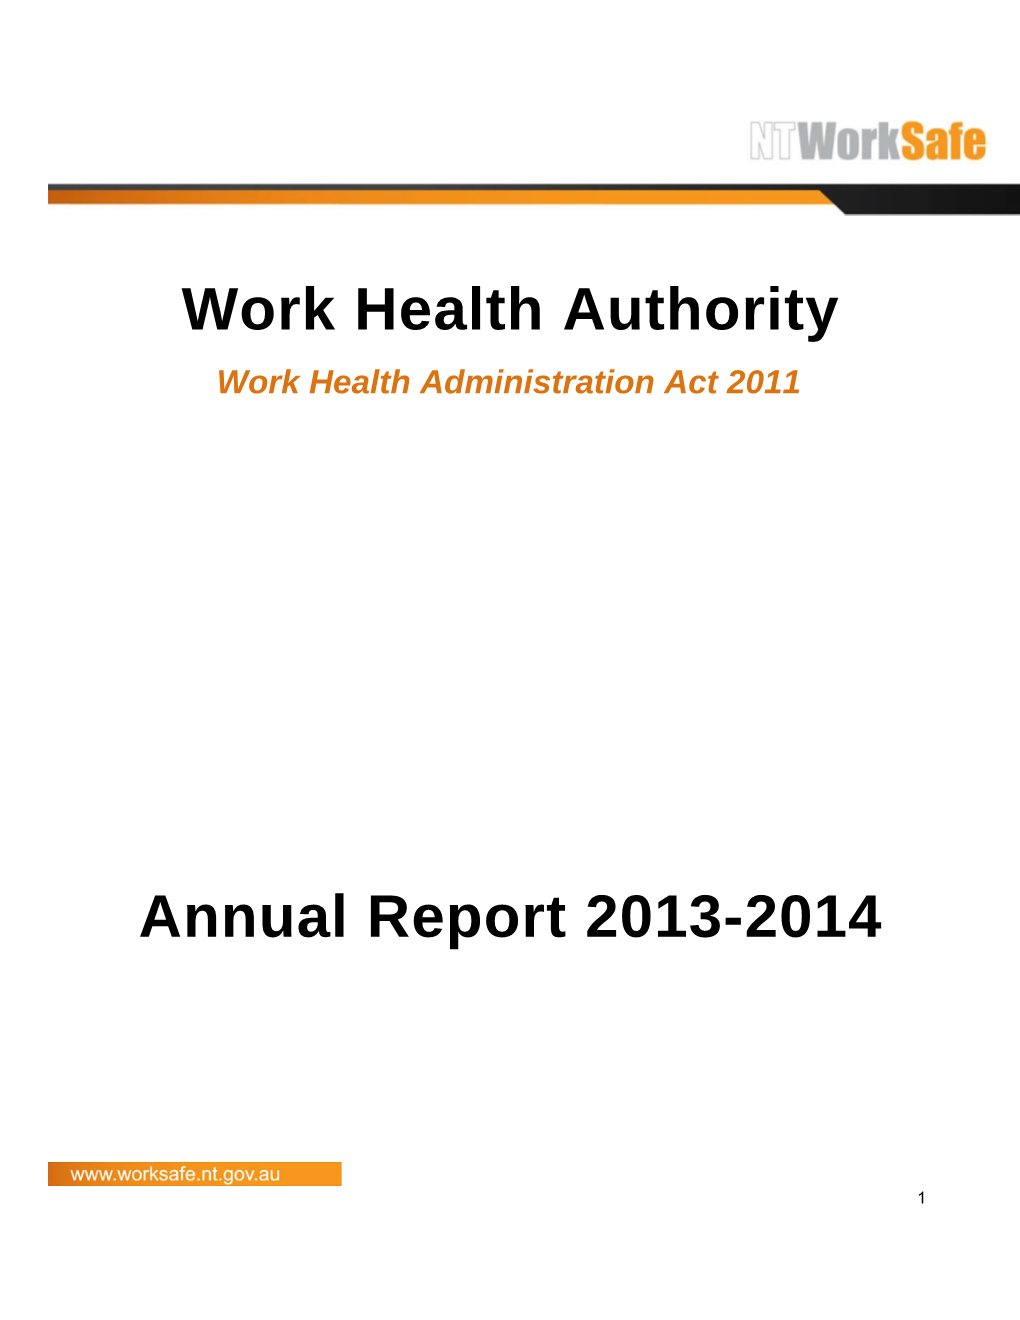 Work Health Authority Annual Report 2013-2014